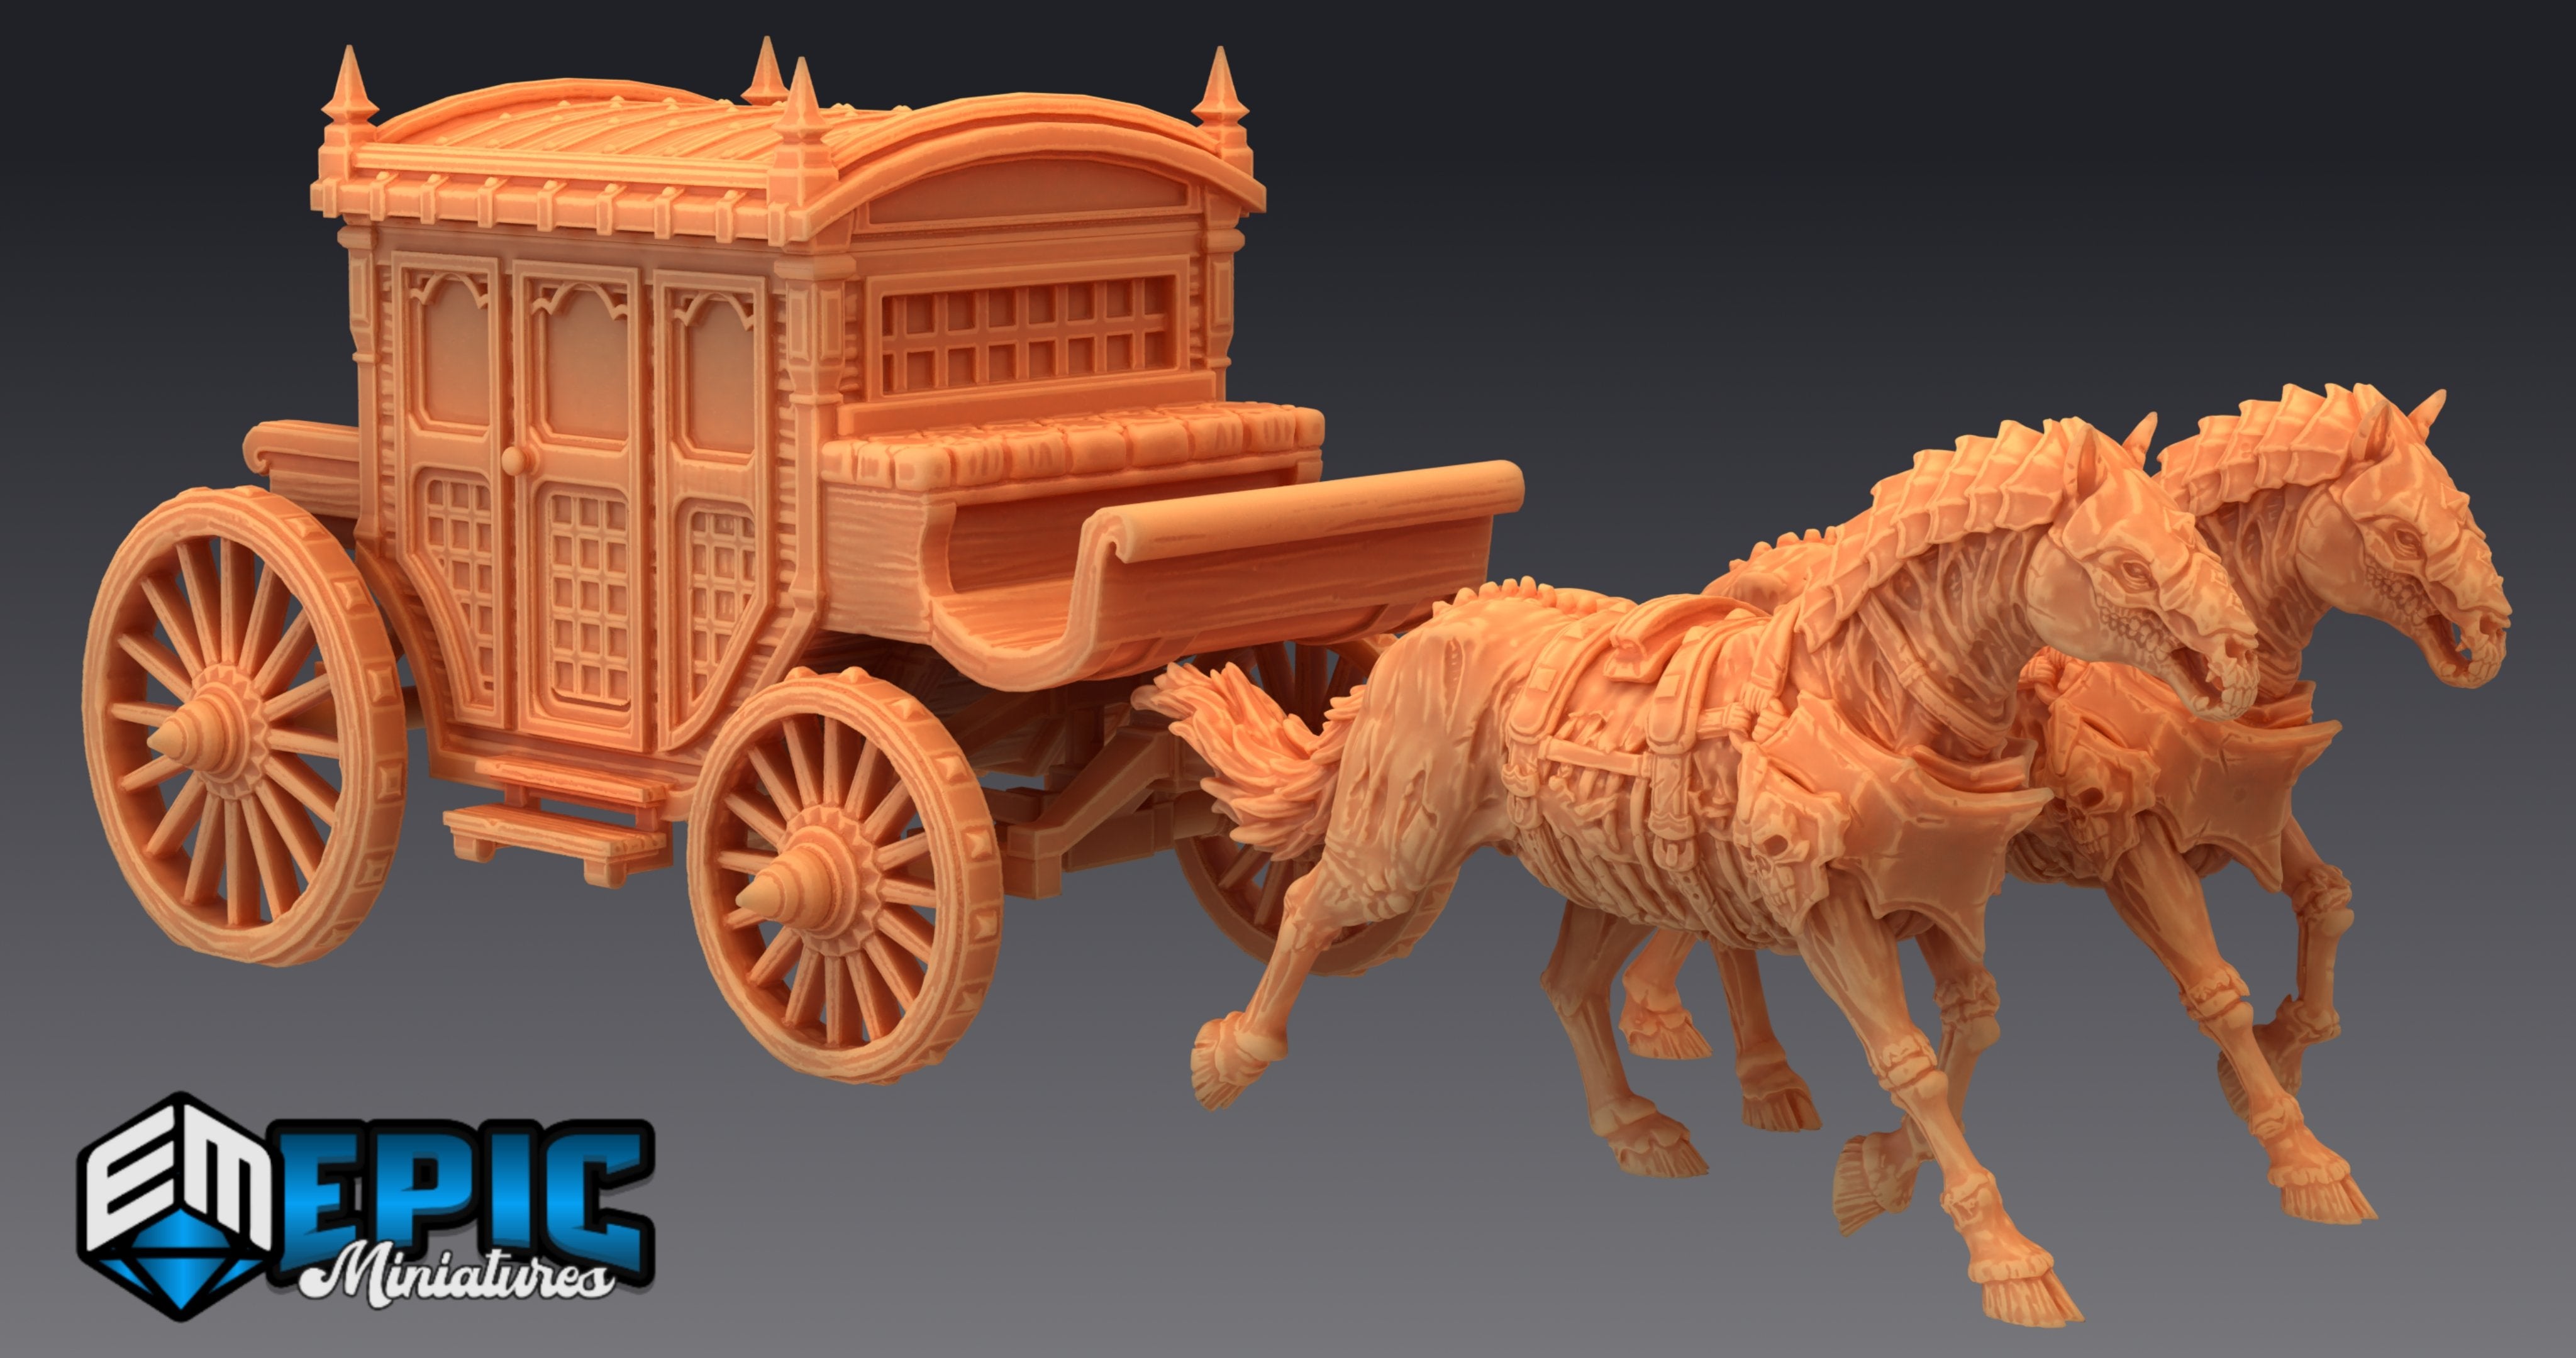 Undead Horse-Drawn Carriage - The Printable Dragon